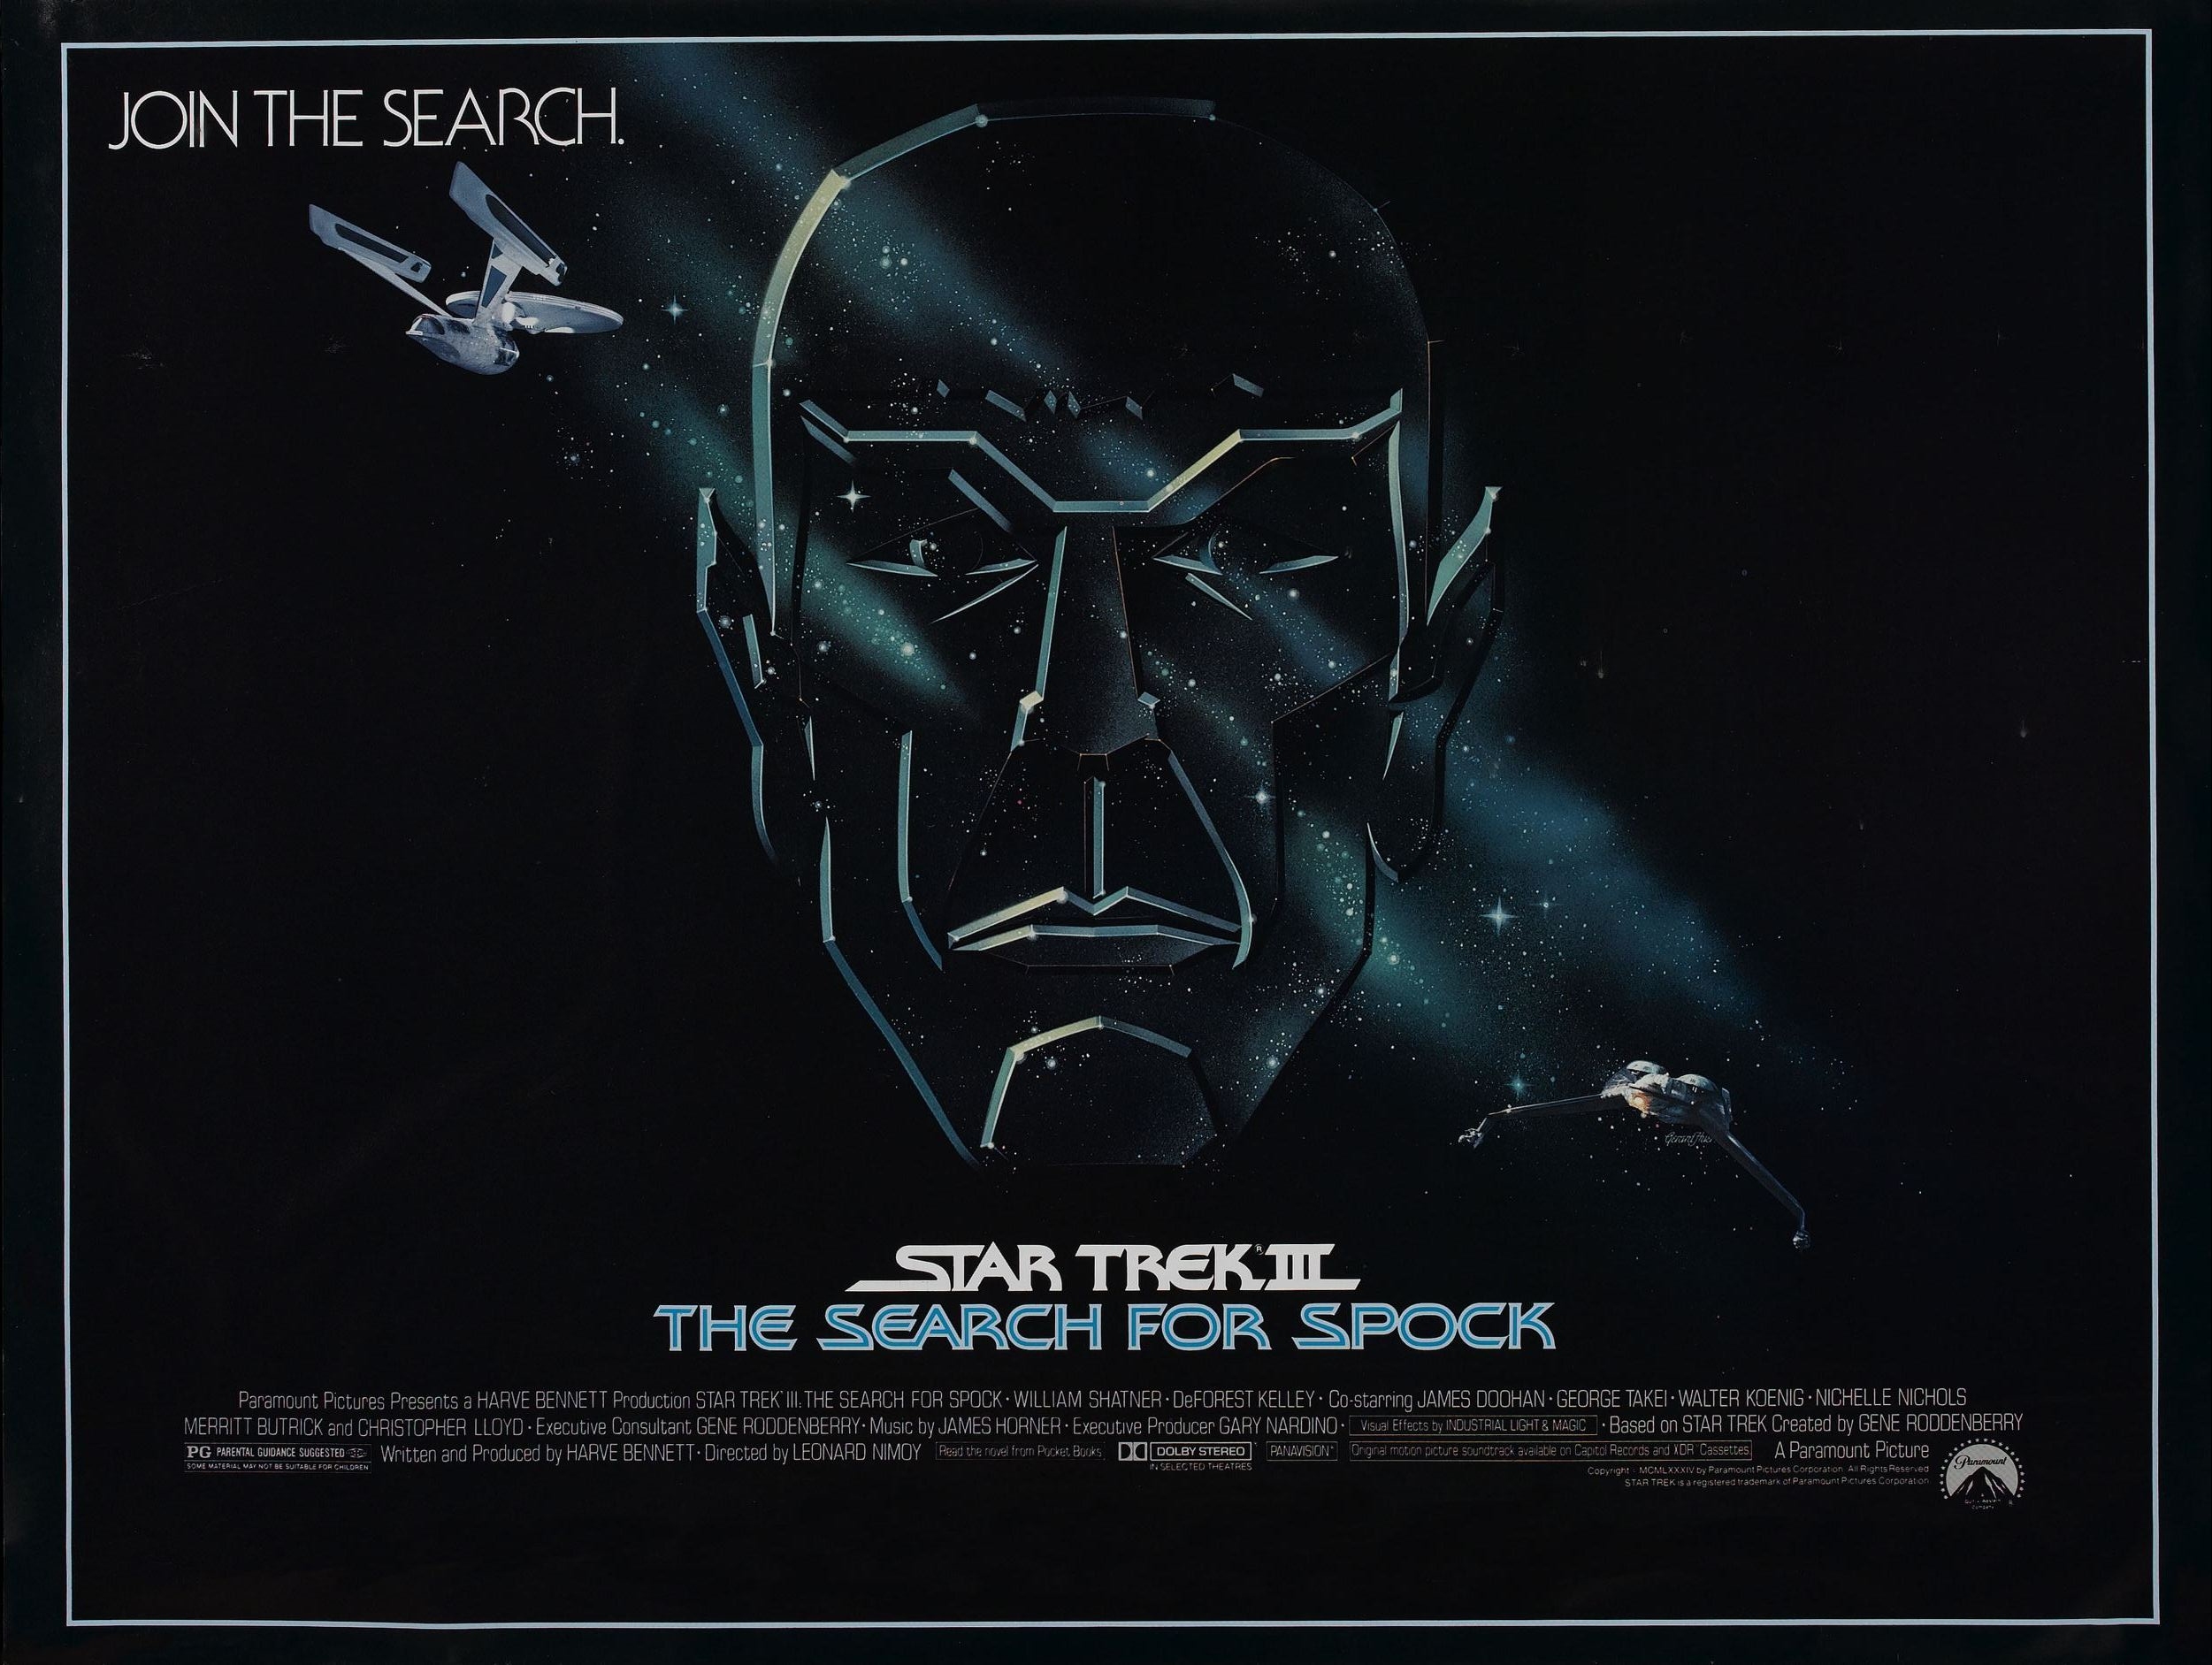 Star Trek Iii: The Search For Spock Wallpapers